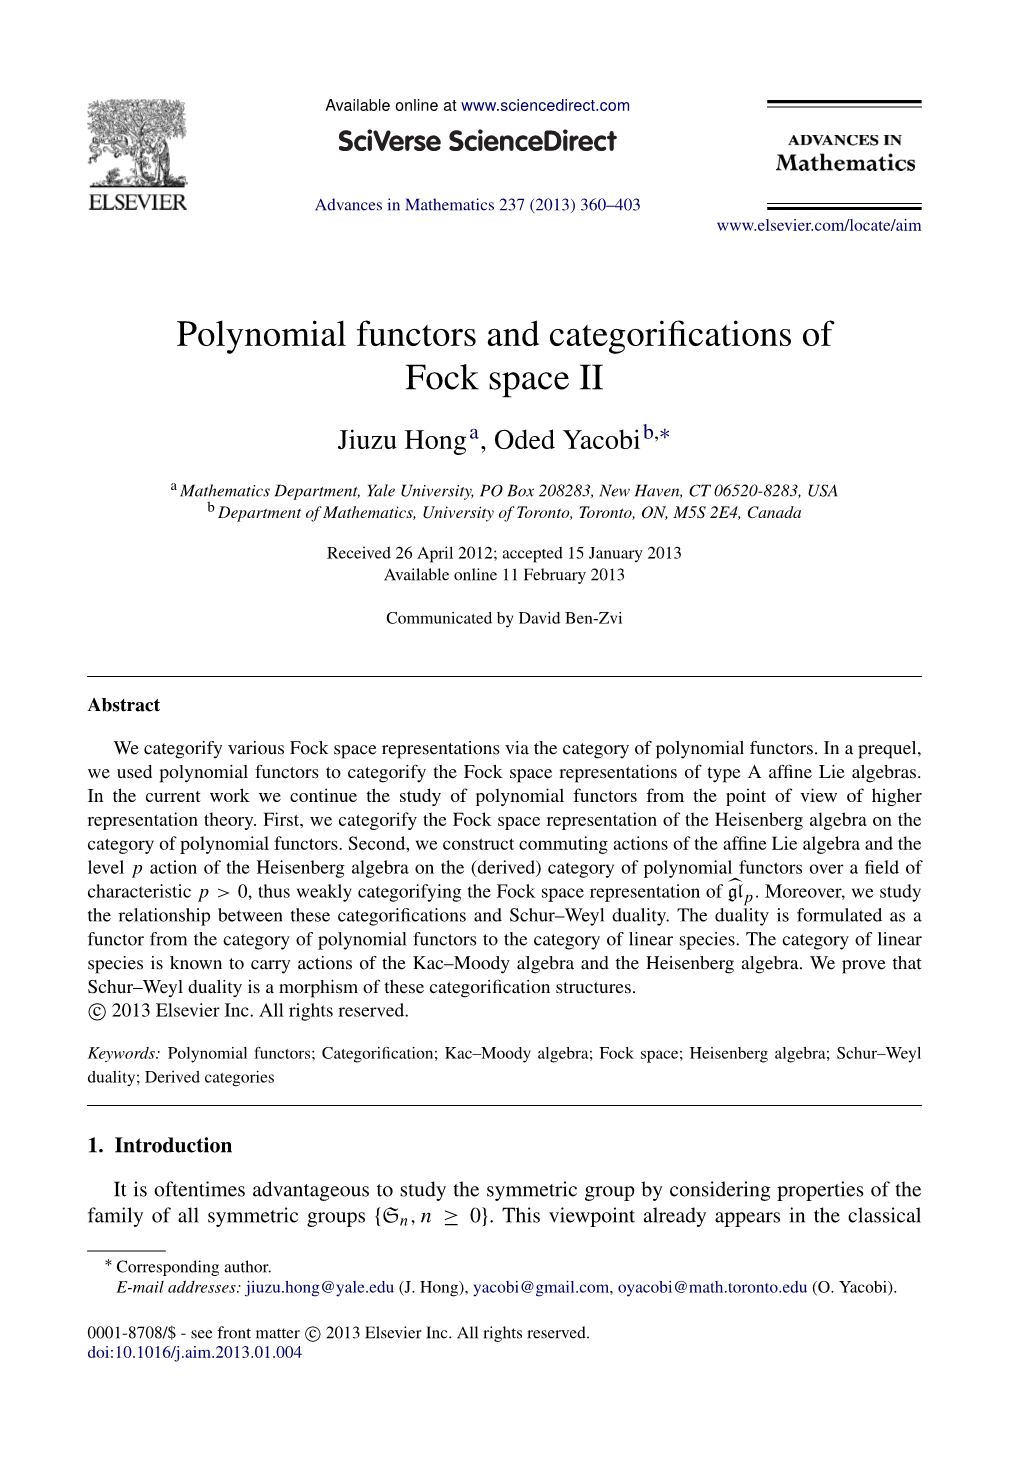 Polynomial Functors and Categorifications of Fock Space II